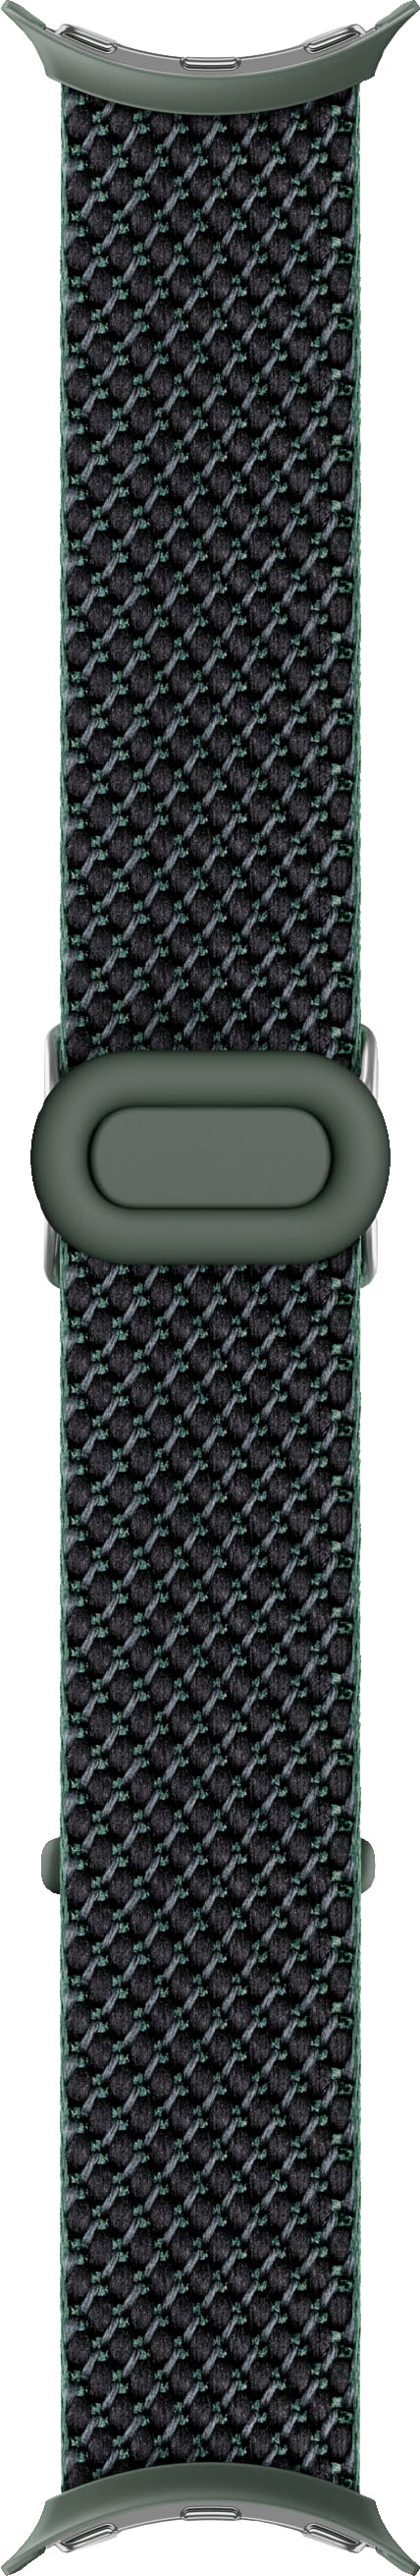 Google Woven Band, One Ivy - GA03270-WW Buy Size Best